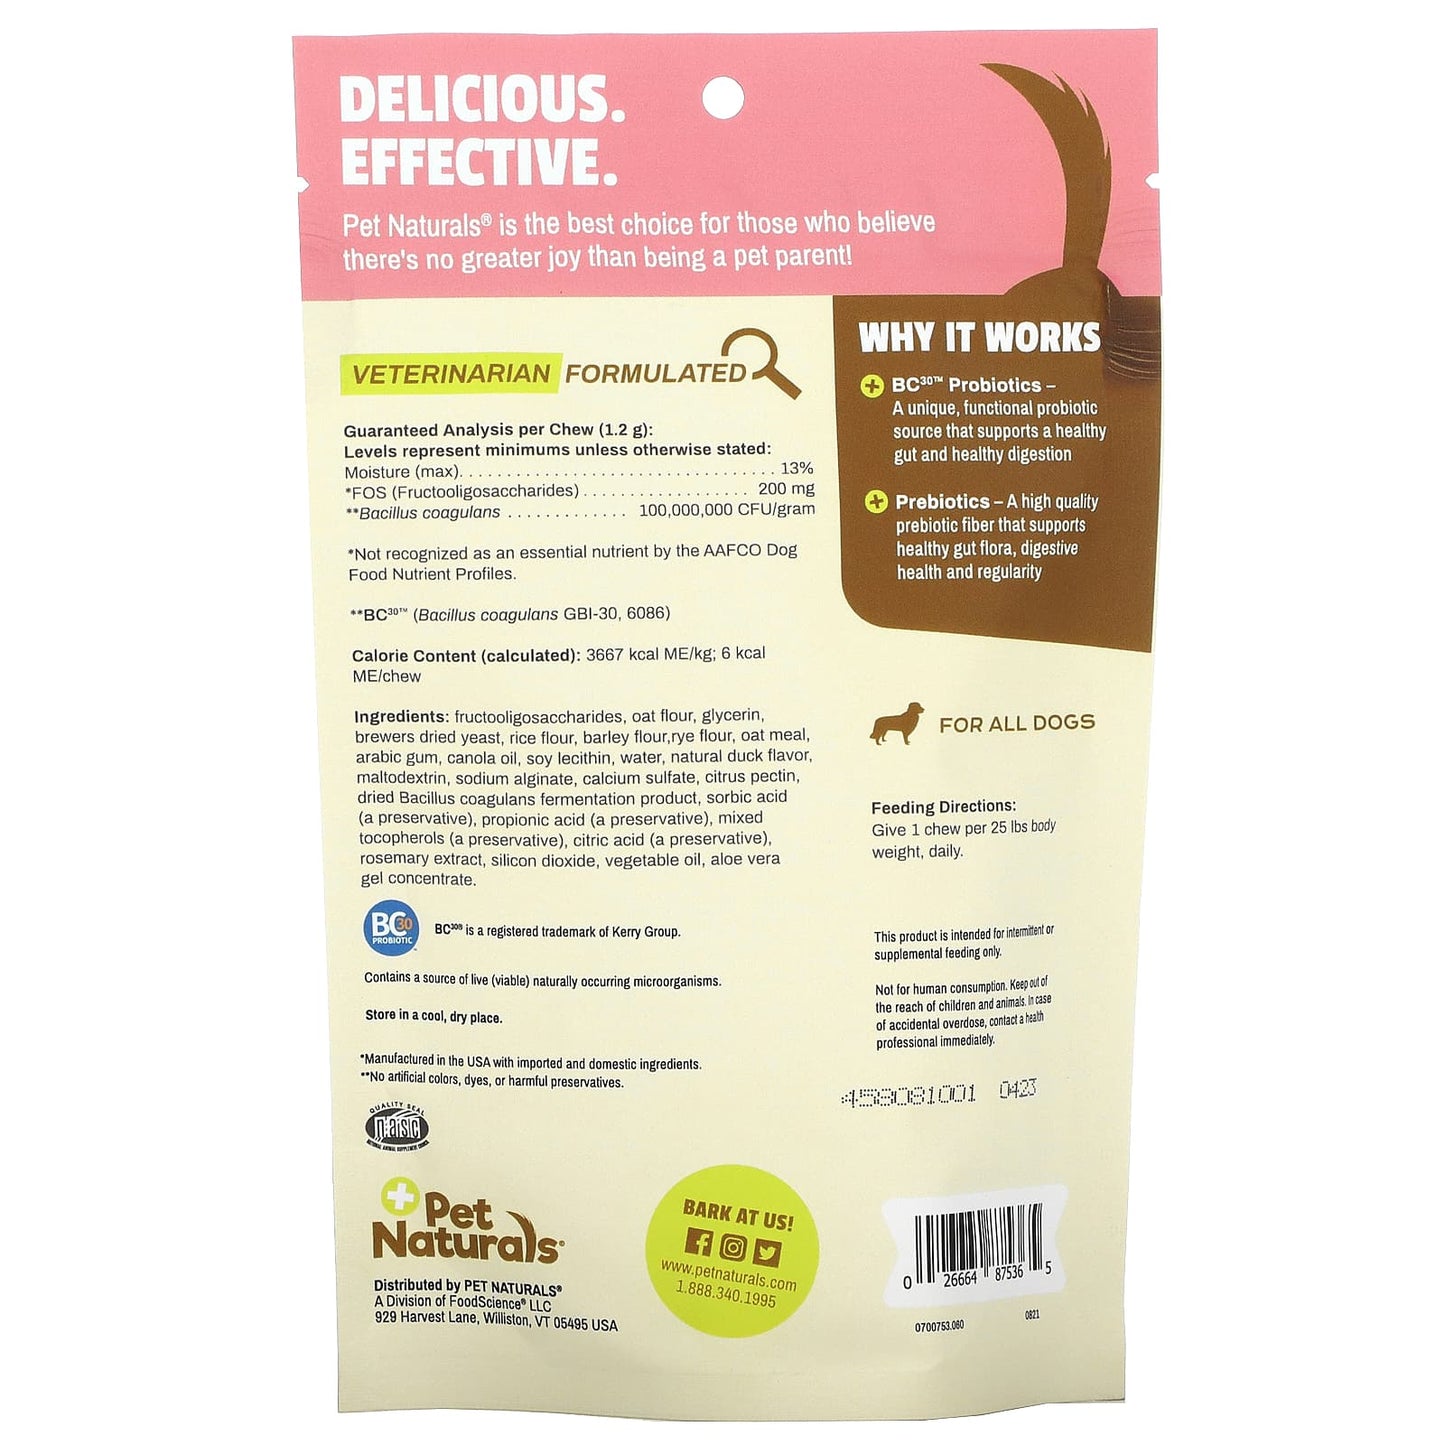 Pet Naturals, Daily Probiotic, For Dogs, All Sizes, 60 Chews, 2.54 oz (72 g)